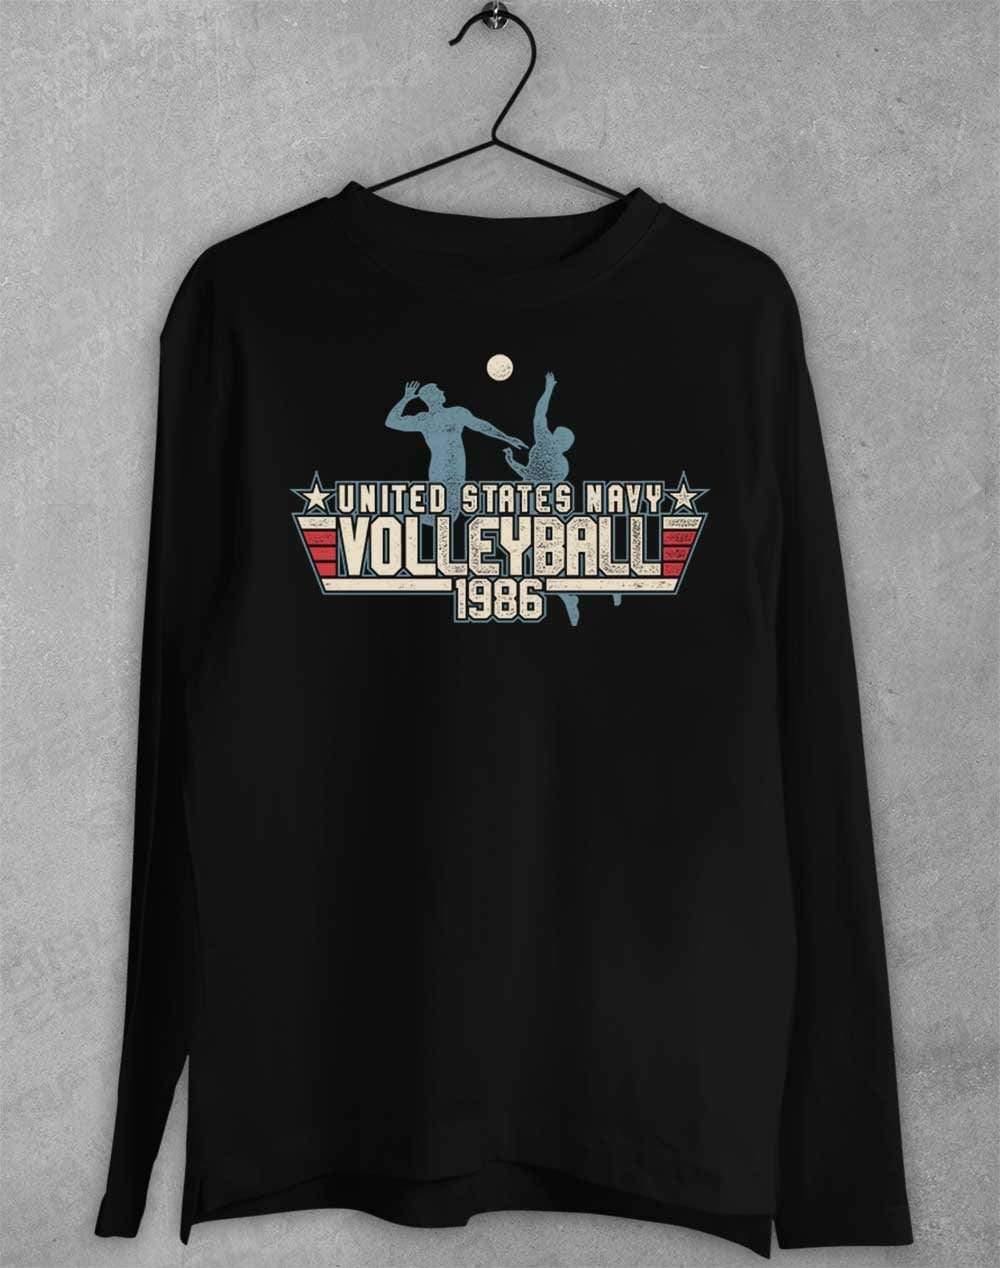 US Navy Volleyball 1986 Long Sleeve T-Shirt S / Black  - Off World Tees